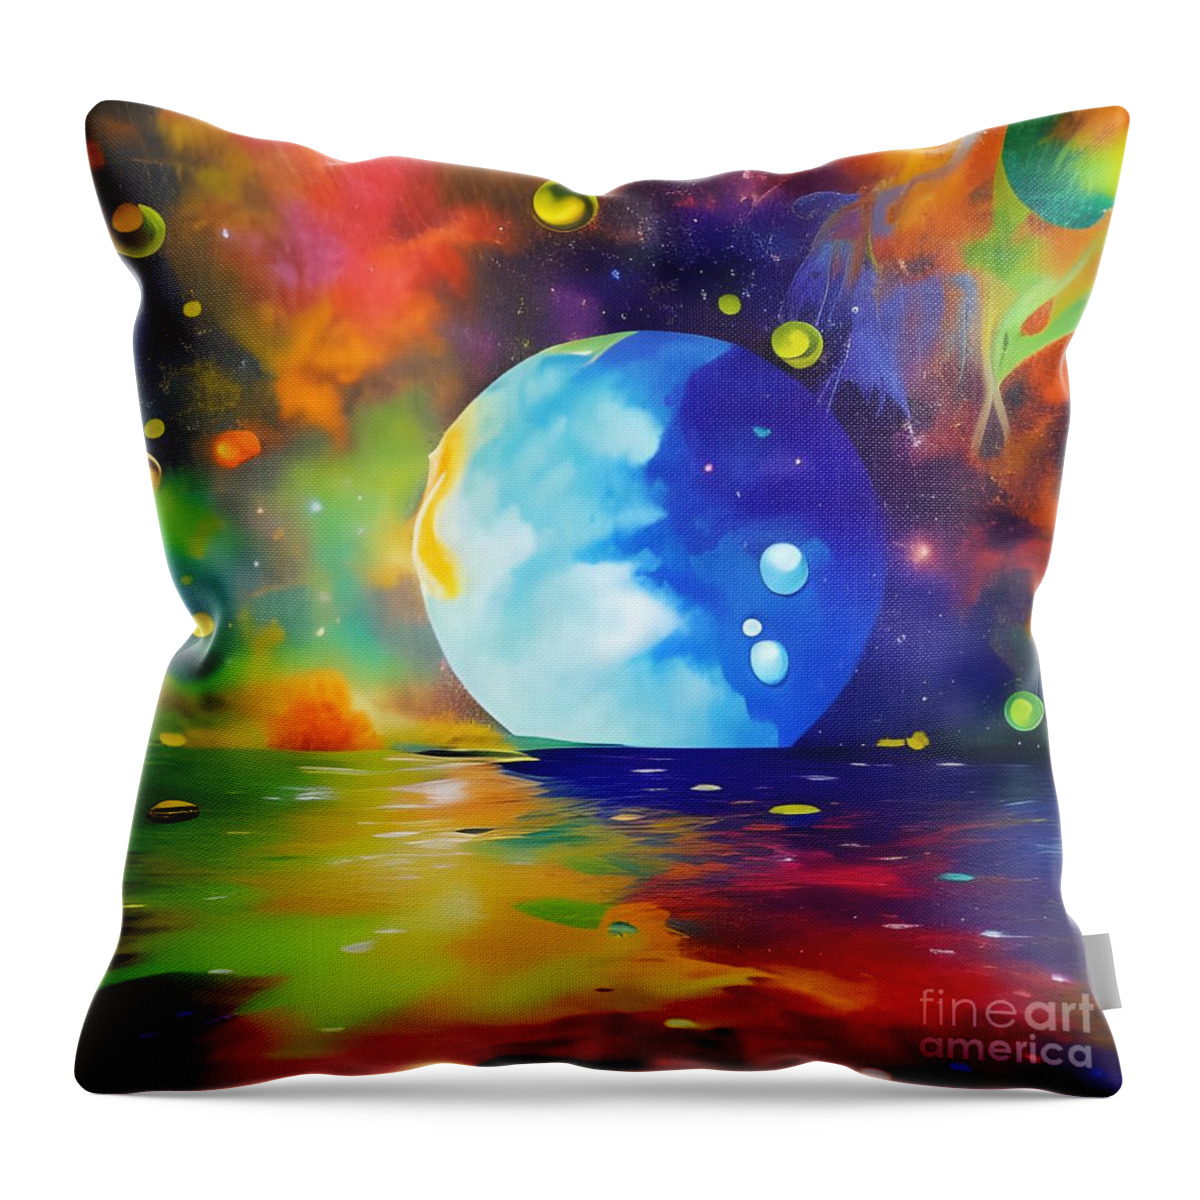 Cosmos Throw Pillow featuring the digital art The Cosmos by Robert Stanhope